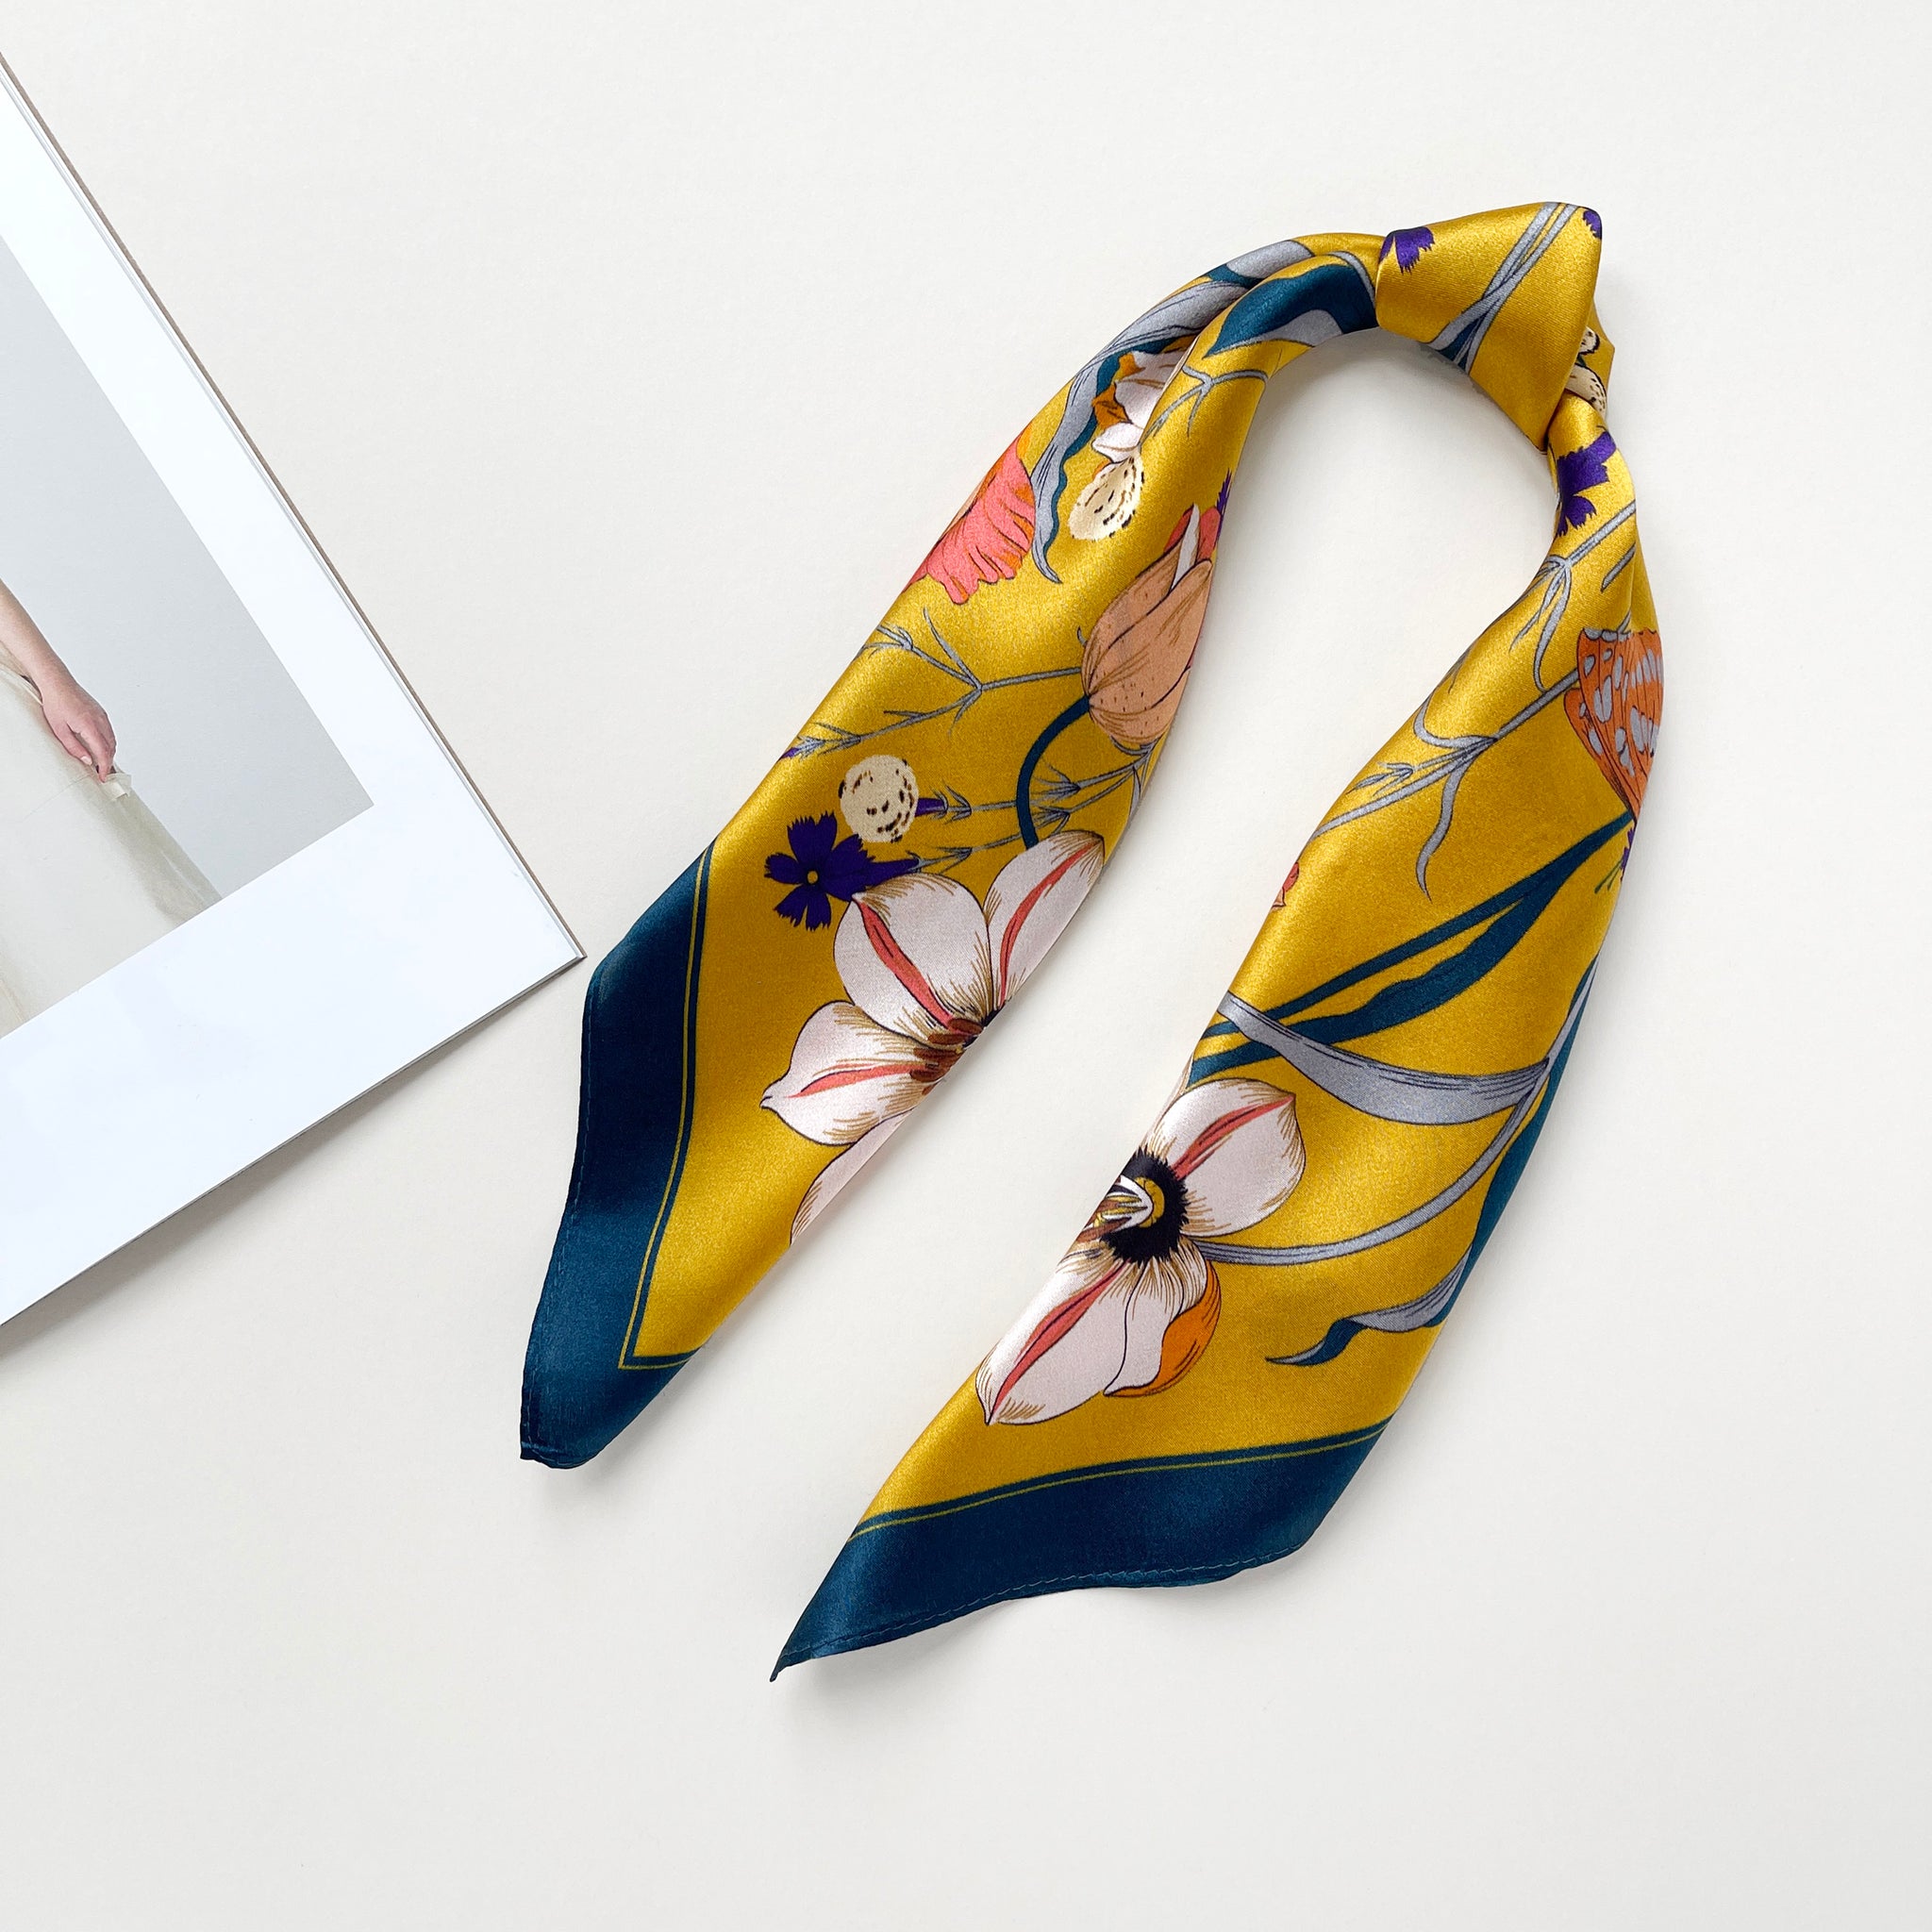 vintage vibe silk bandana scarf in vibrant mustard yellow featuring flowers and butterflies print with dark blue edge, knotted as a ponytail